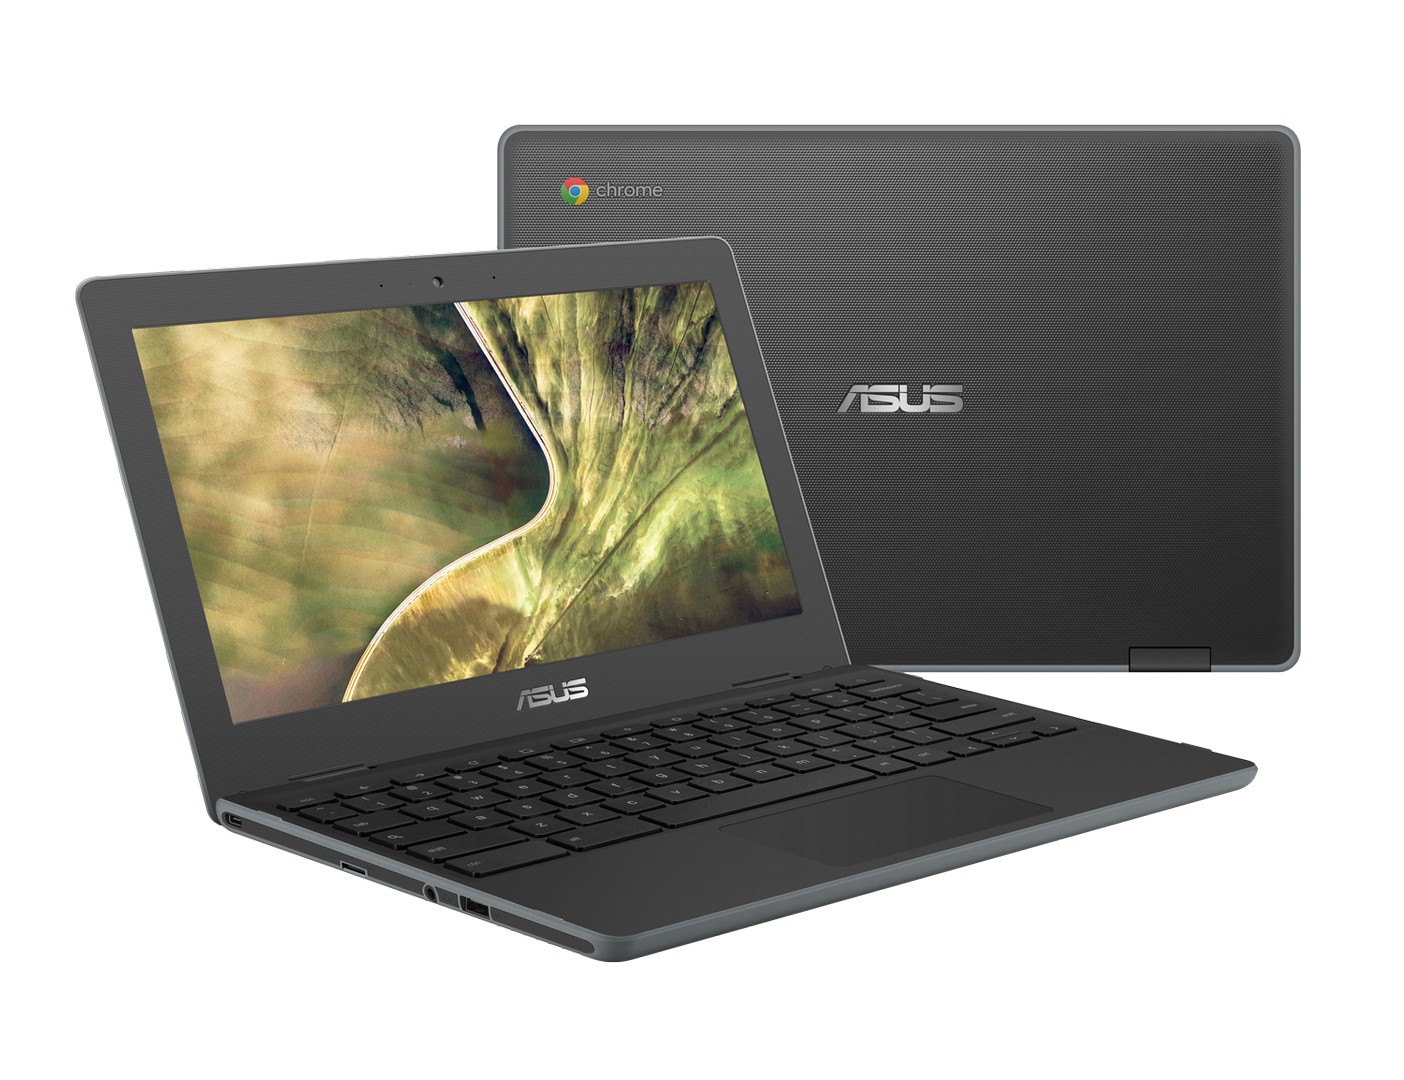 Announcing the ASUS Chromebook Education Series 1